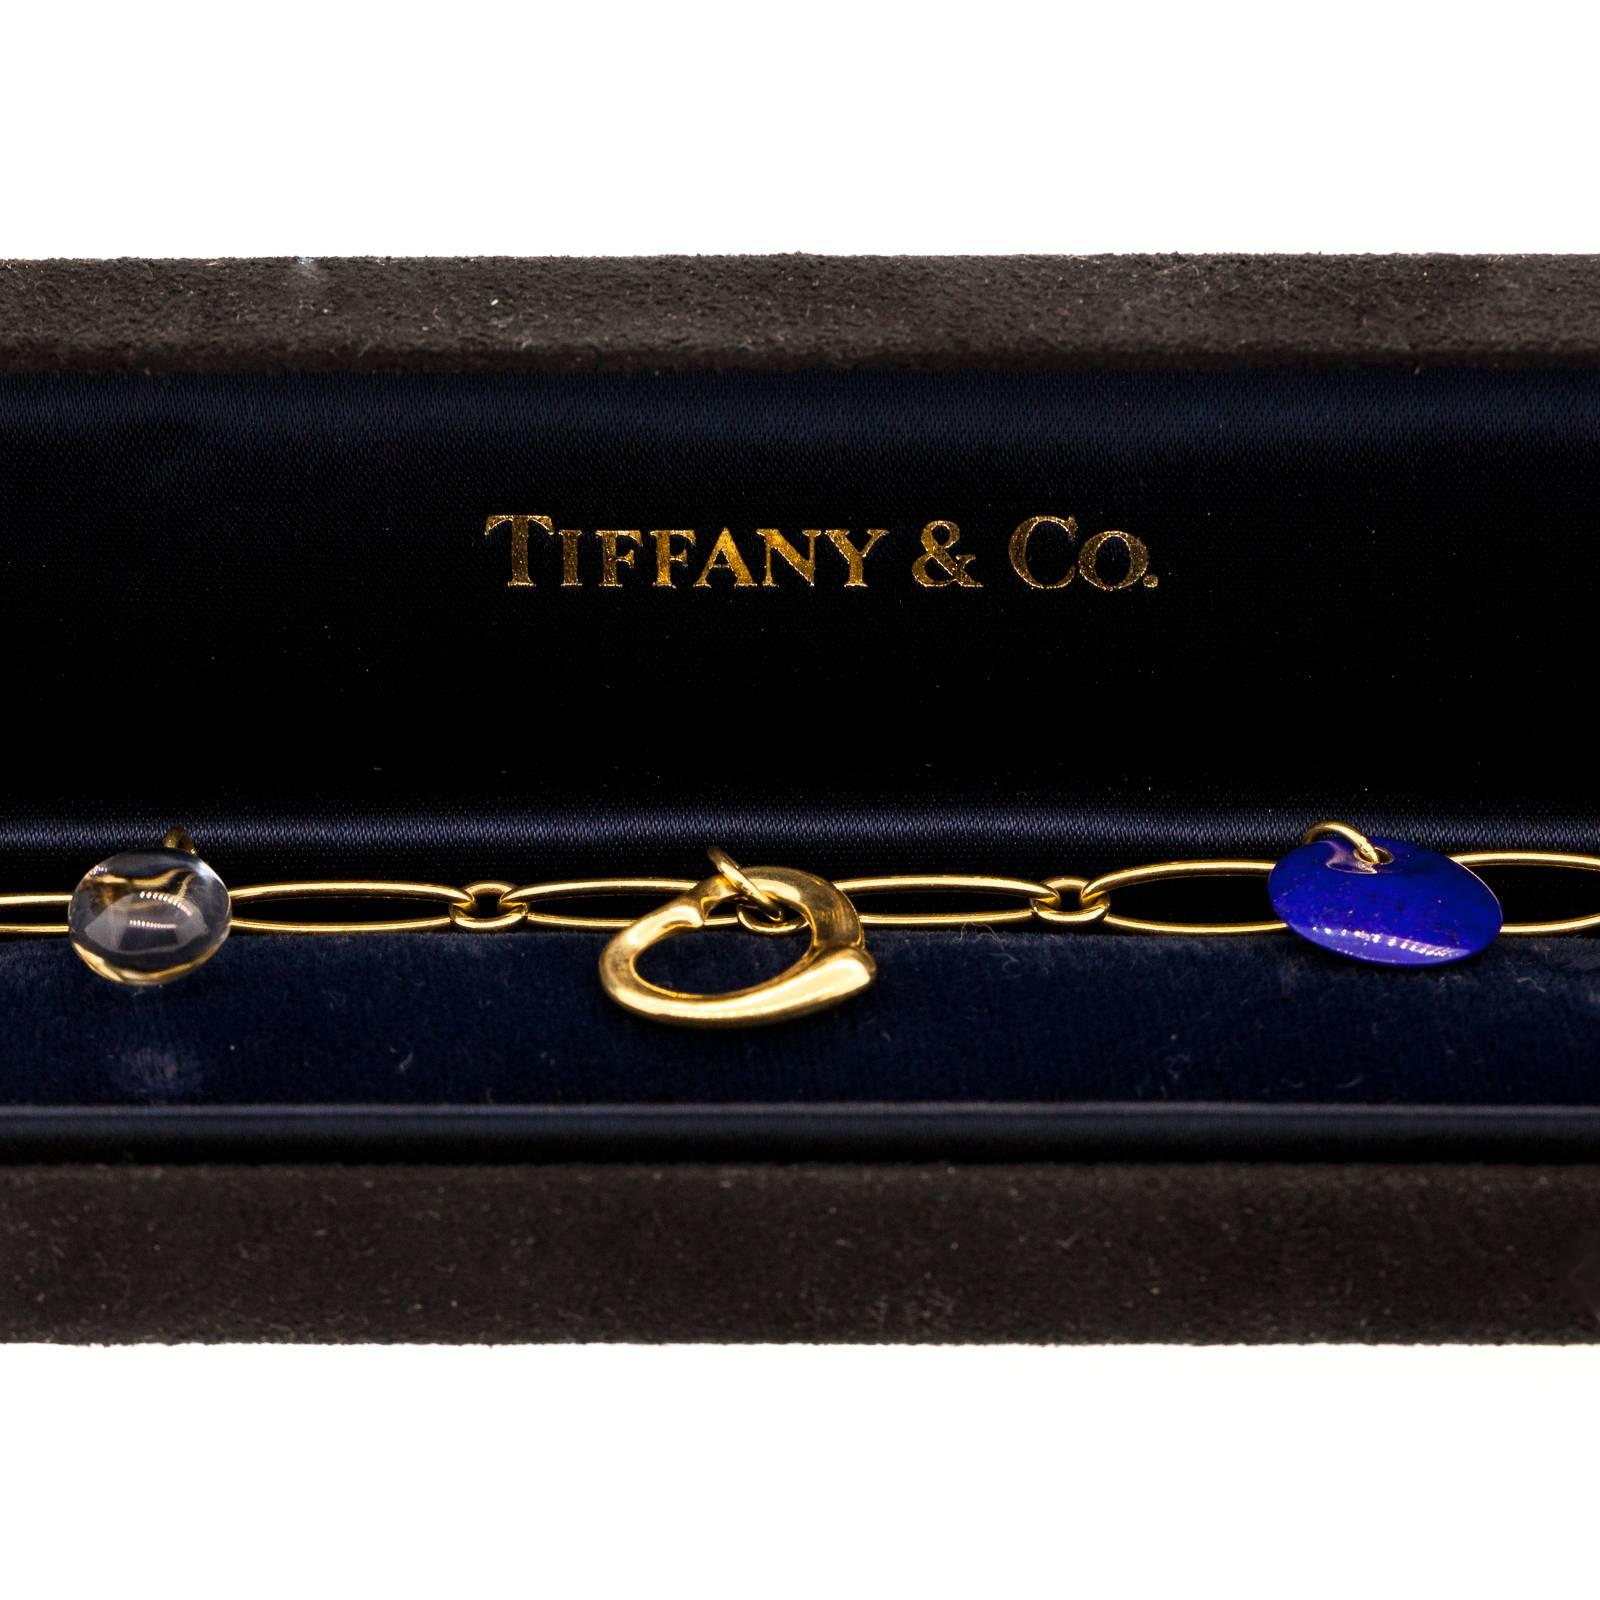 18KT yellow gold bracelet of open oval links and featuring 5 gem & gold charms., Lapiz Azul, Rock Crystal, red Jasper, Jade & gold open Hart.  The clasp is signed “Elsa Peretti – Spain Tiffany & Co.  750″.  Original box accompanies the